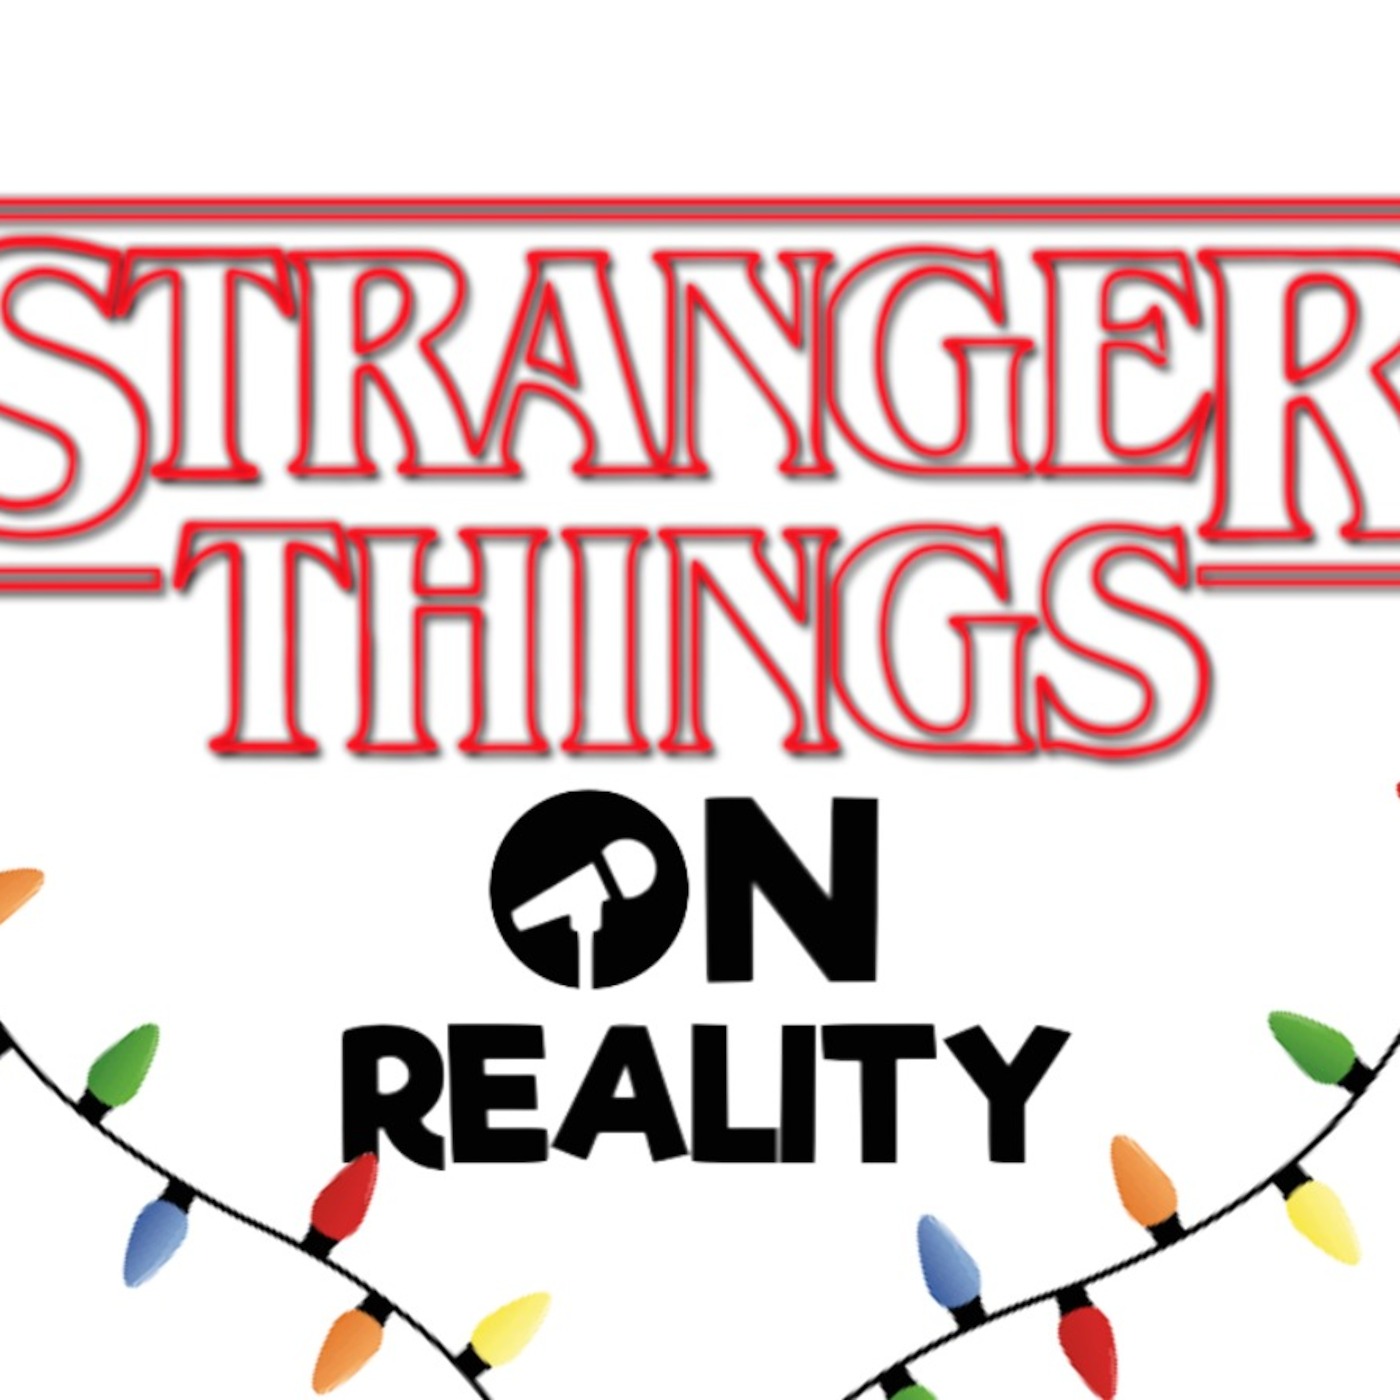 Stranger Things ON REALITY